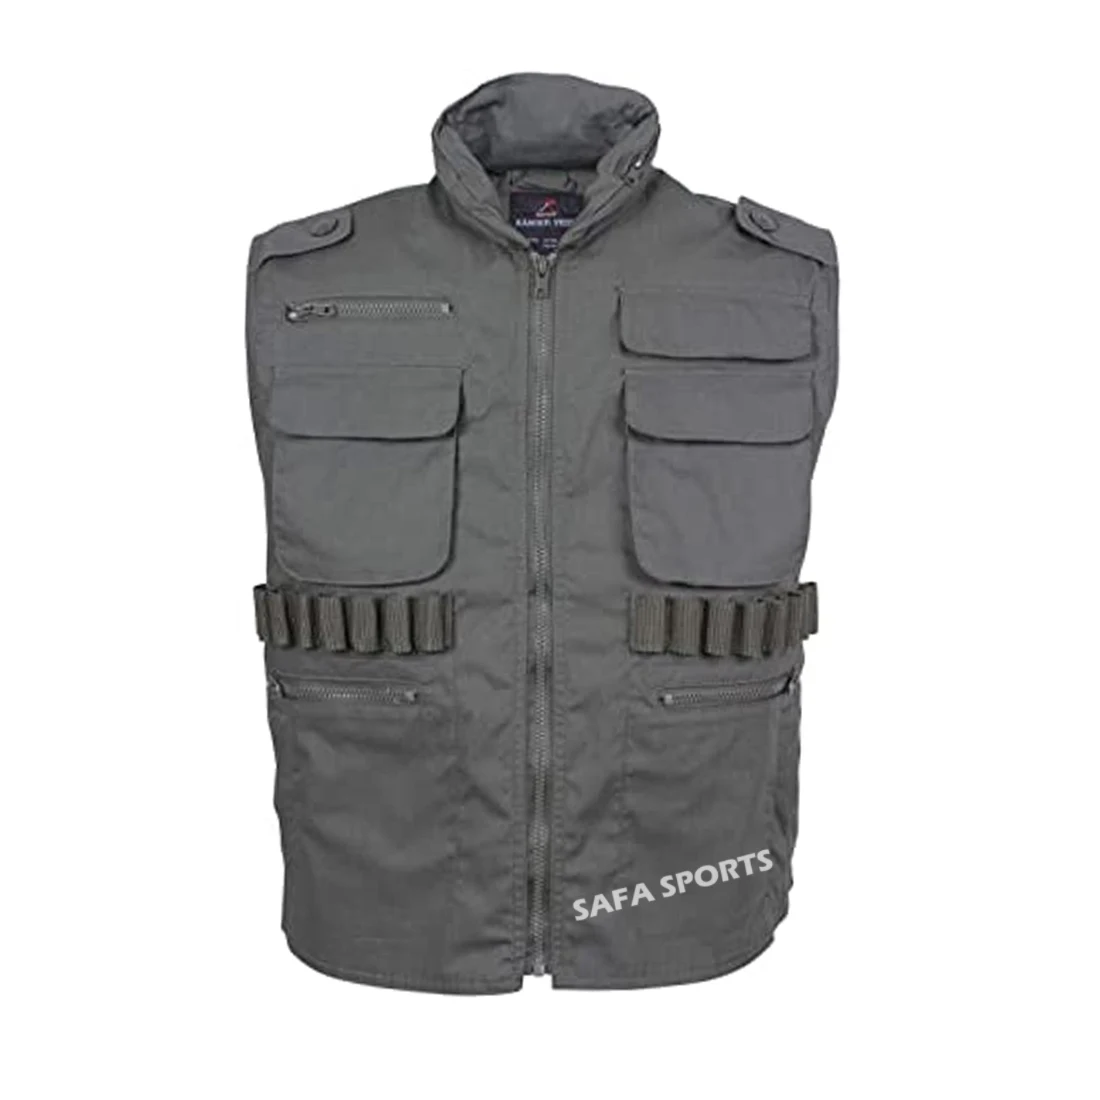 Black Military Tactical Ranger Vest With Hood Rothco 7557 Brand New 